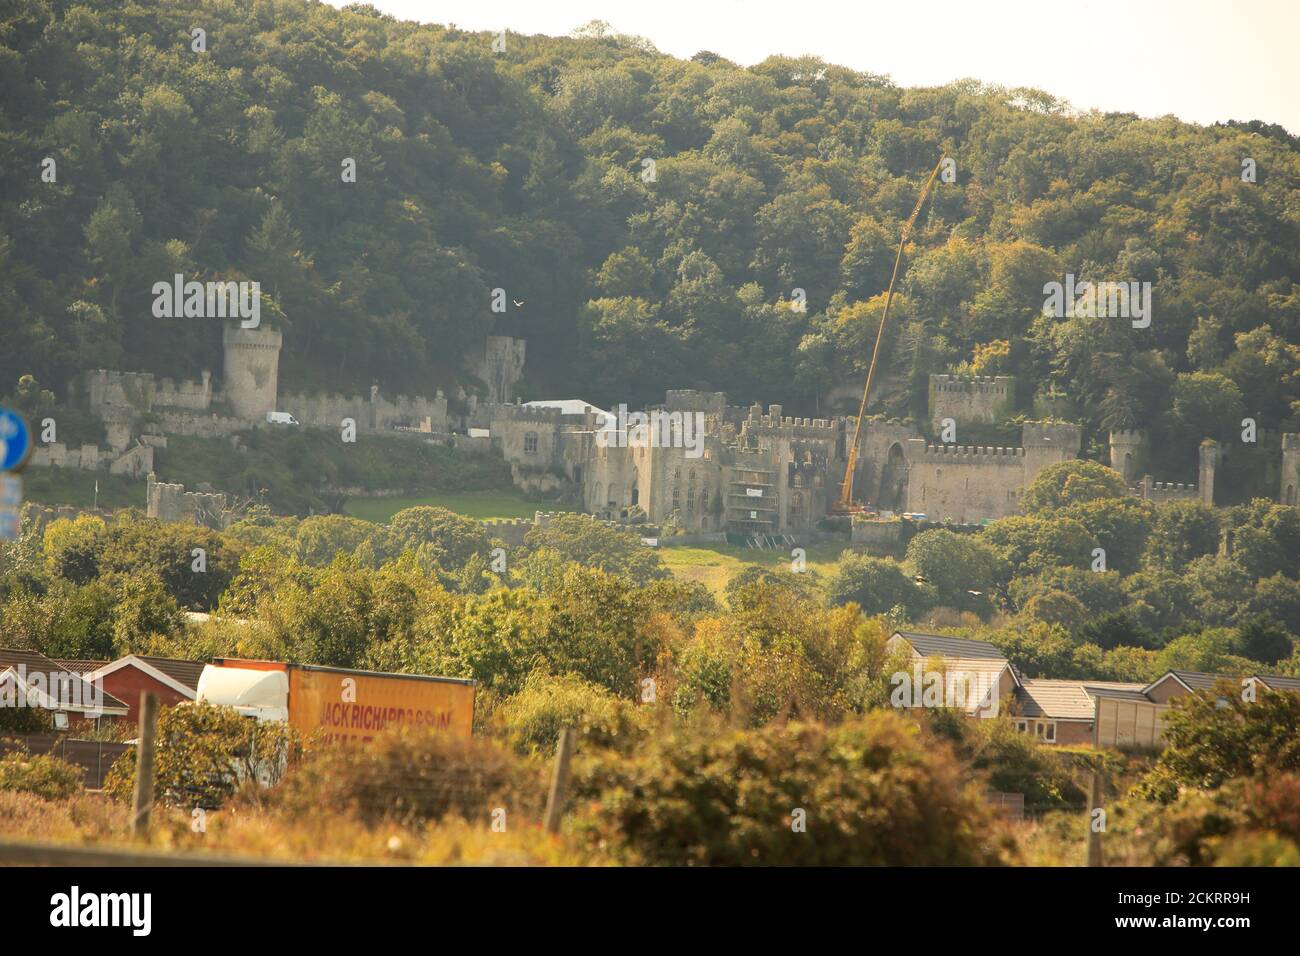 Gwrych Castle being prepped for I’m a celebrity filming credit Ian Fairbrother/Alamy stock photos Stock Photo